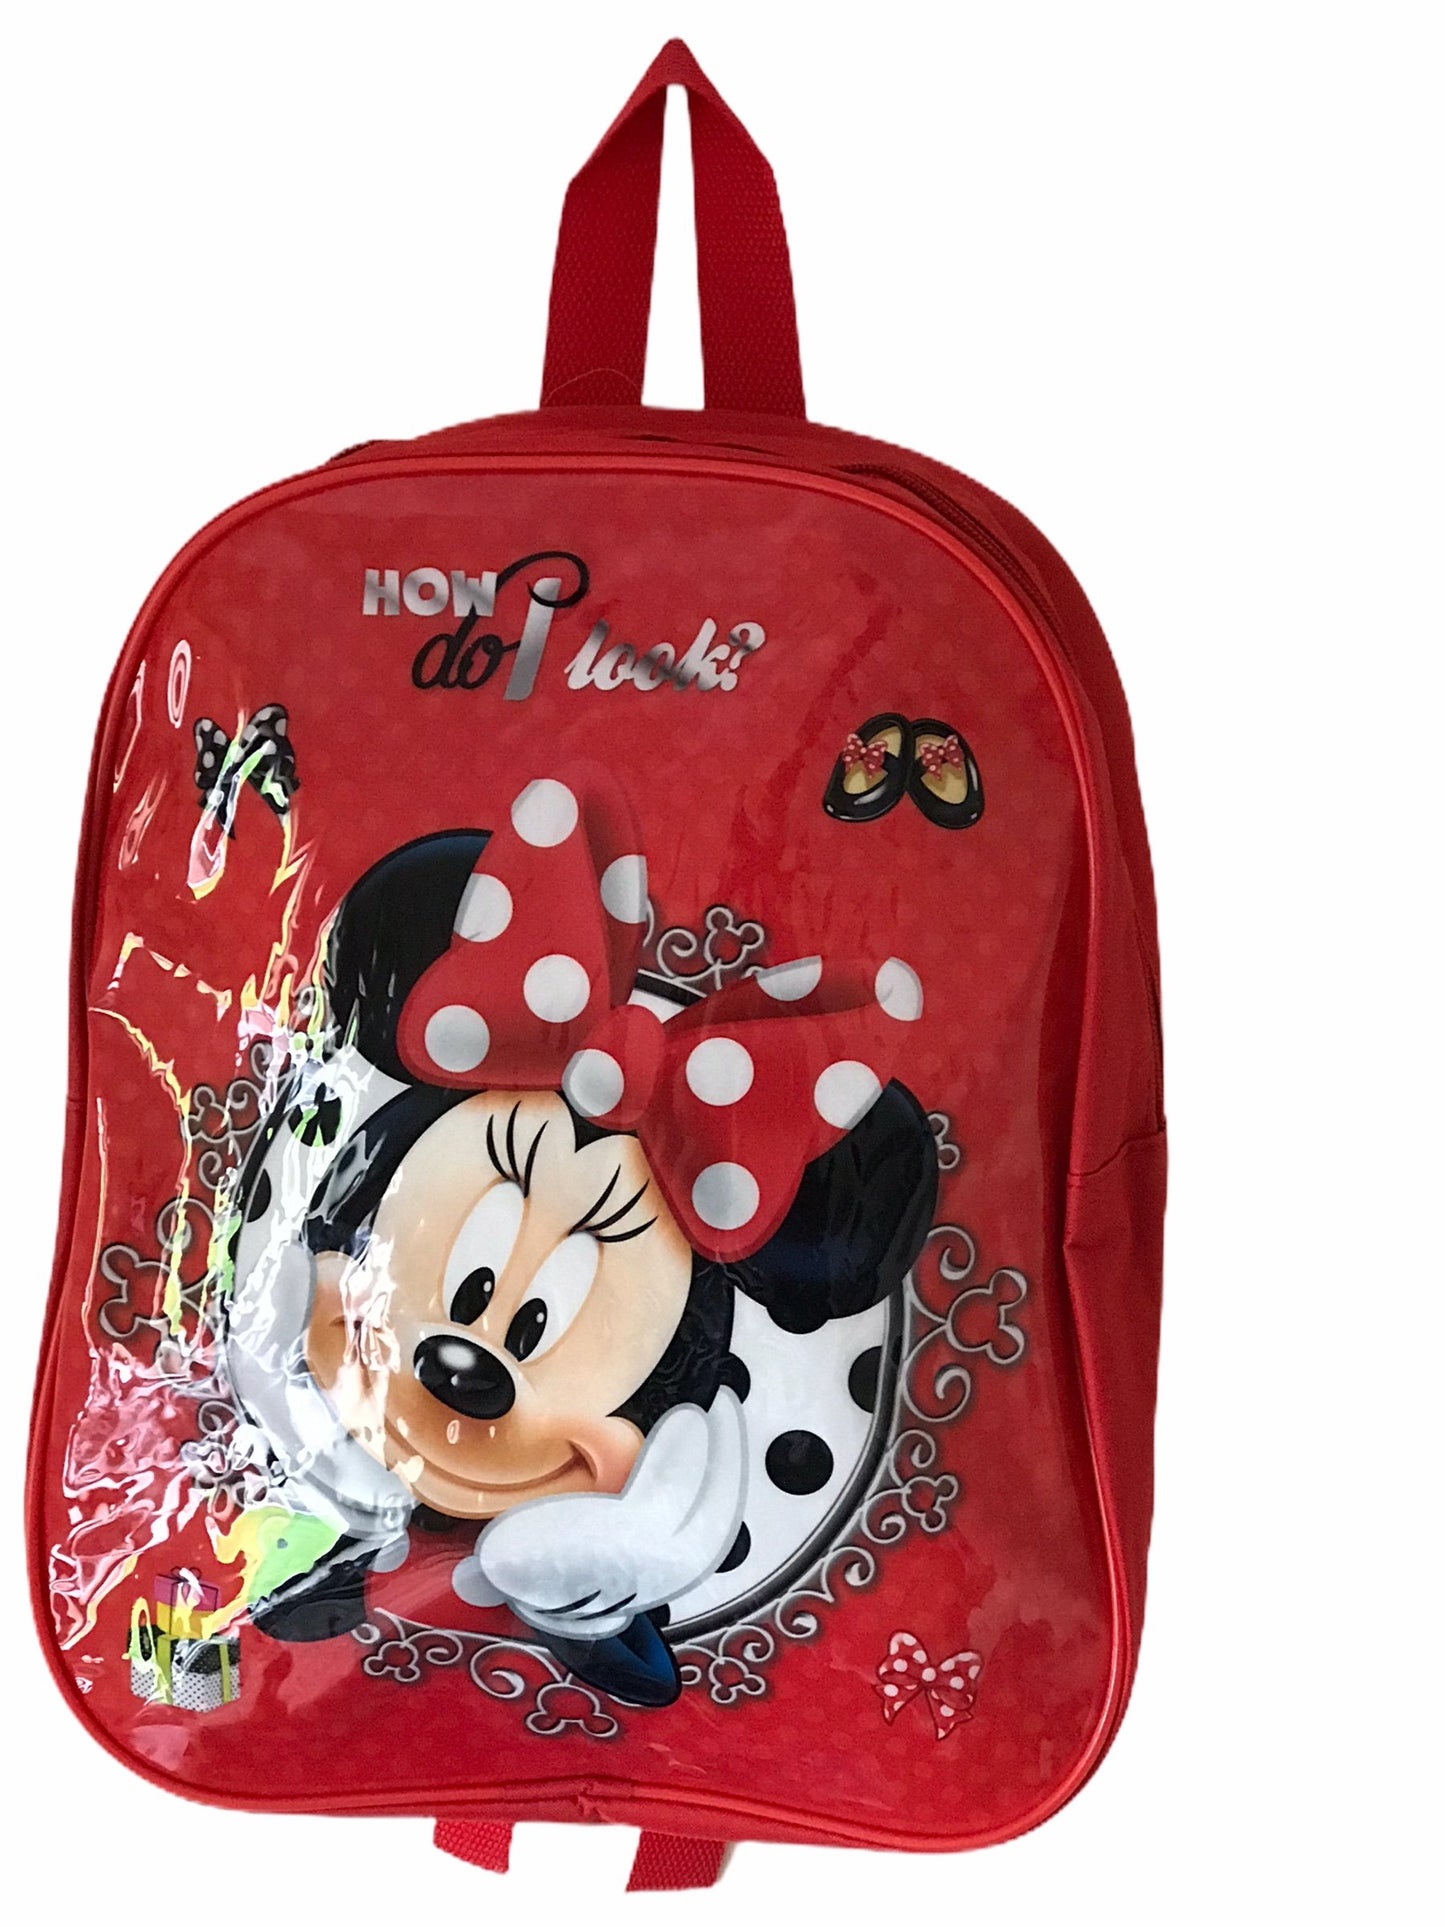 Girl Minnie Mouse Backpack Bag - Glo Selections Kids Shoes